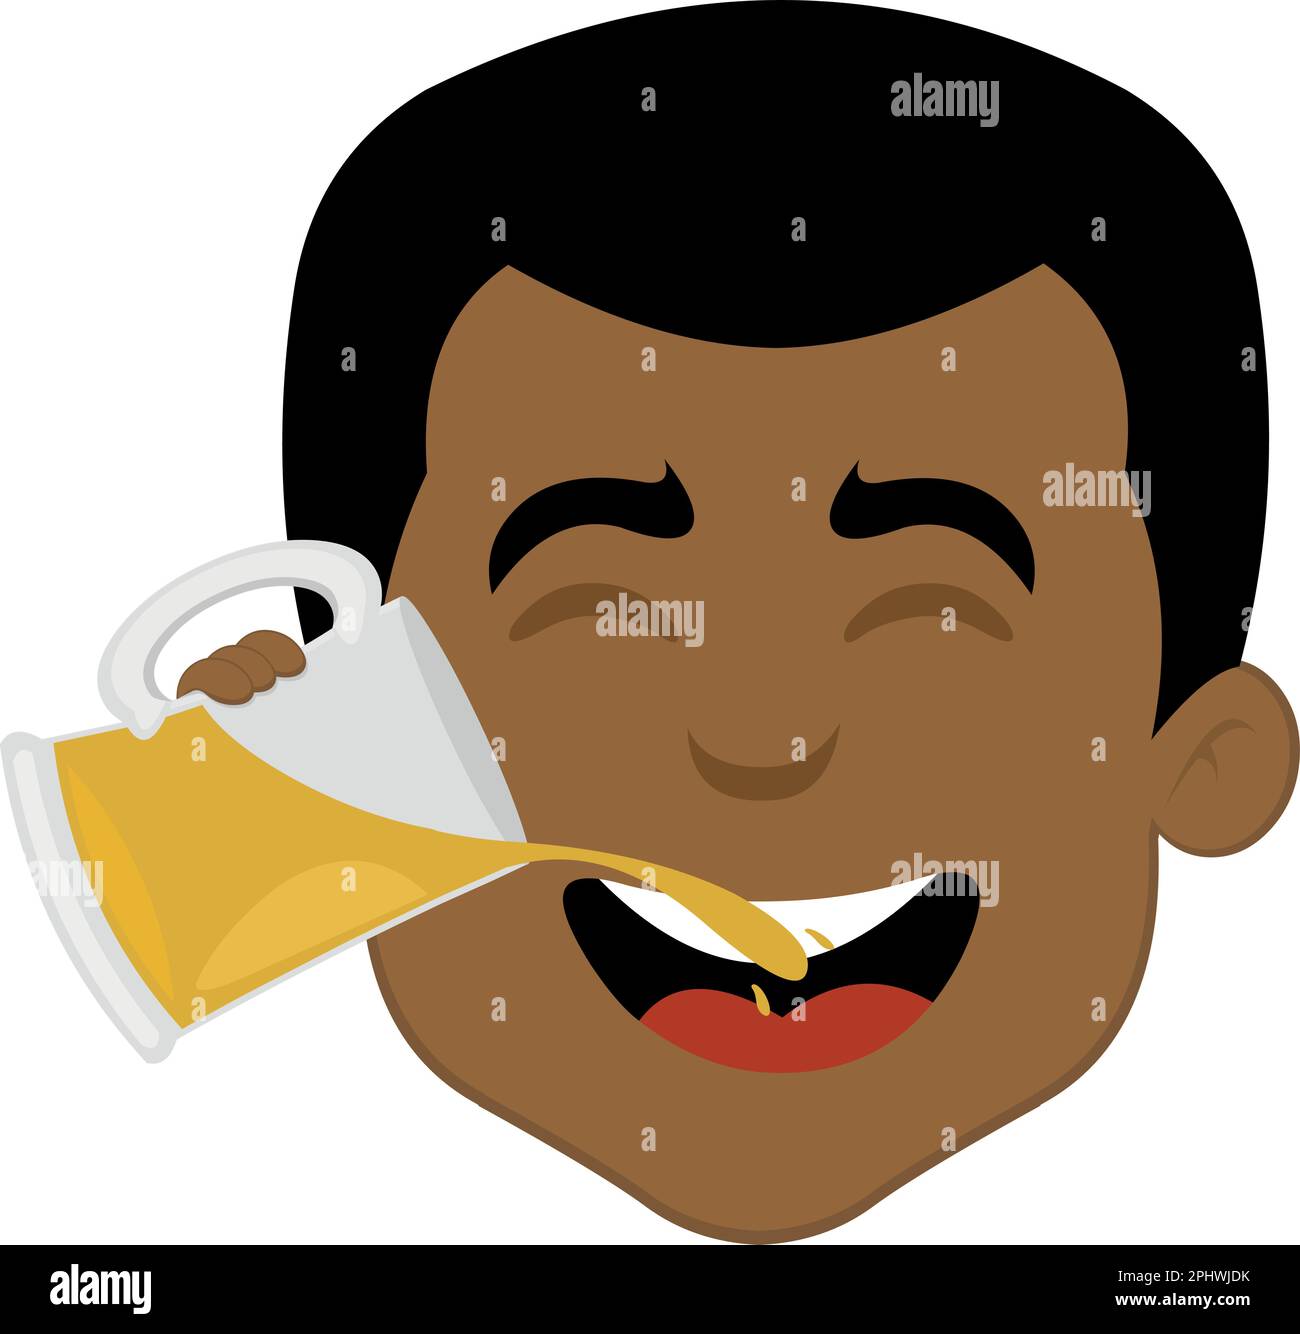 vector illustration face of a cartoon man drinking a glass of beer Stock Vector